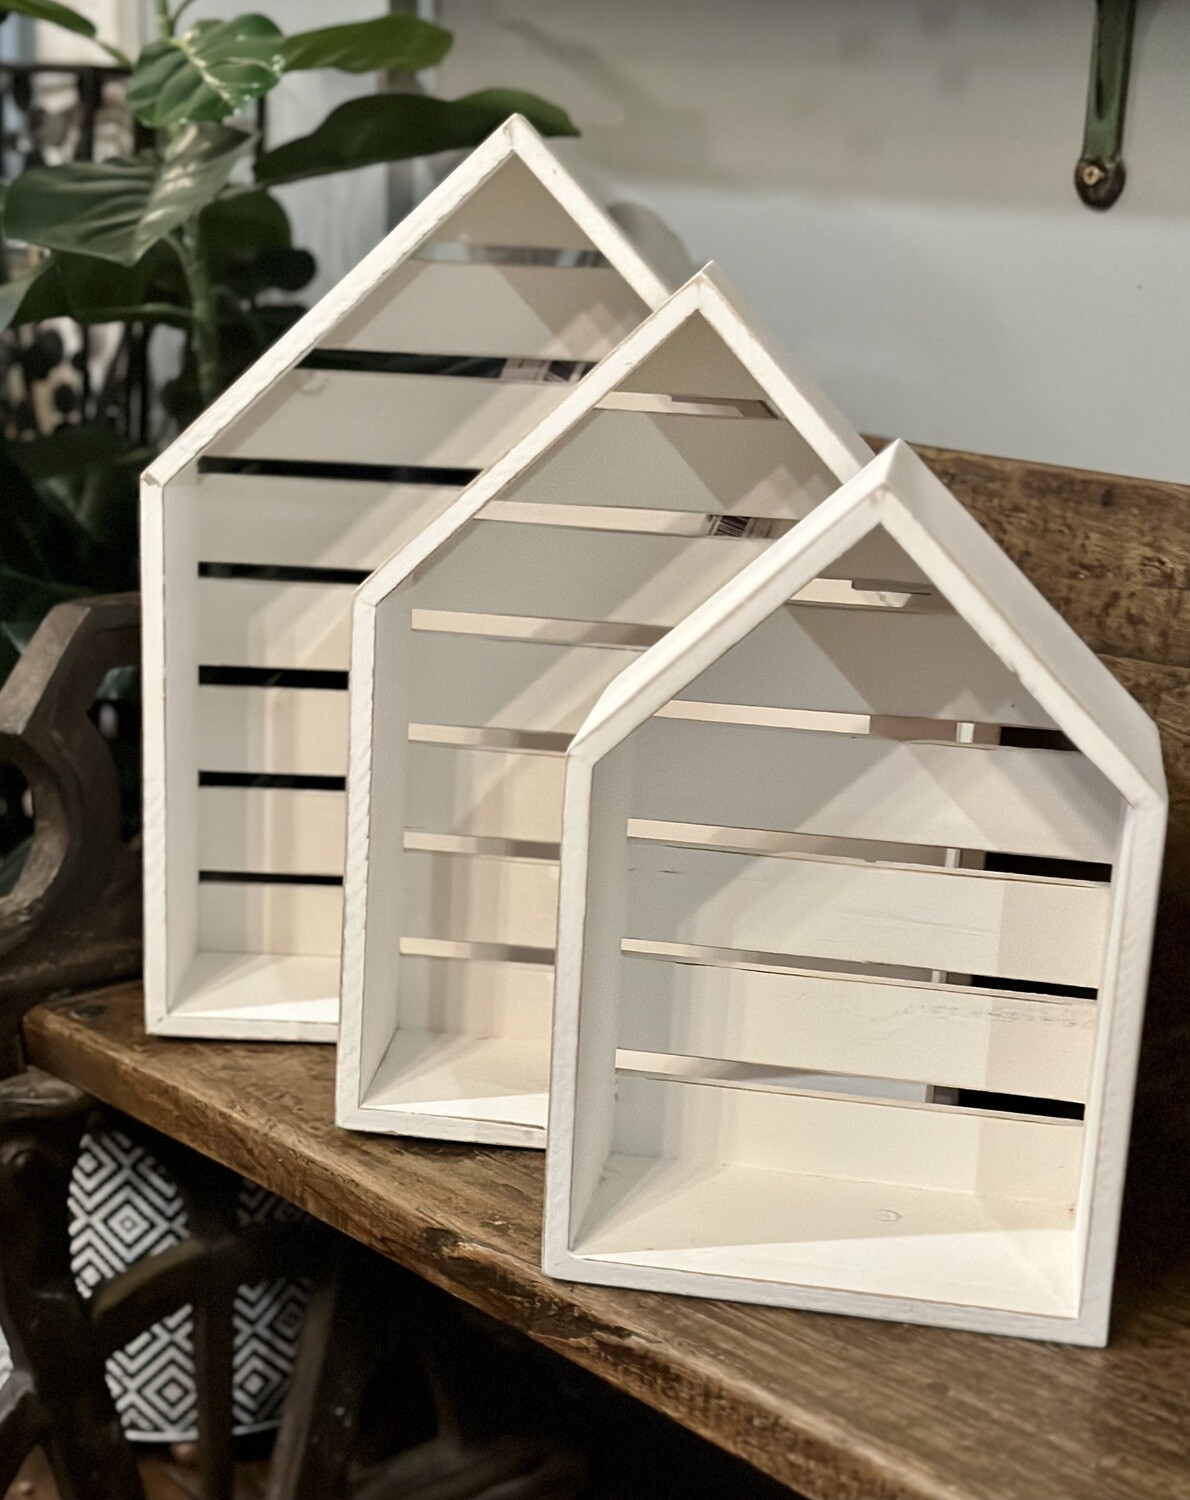 House Shaped Shadow Boxes